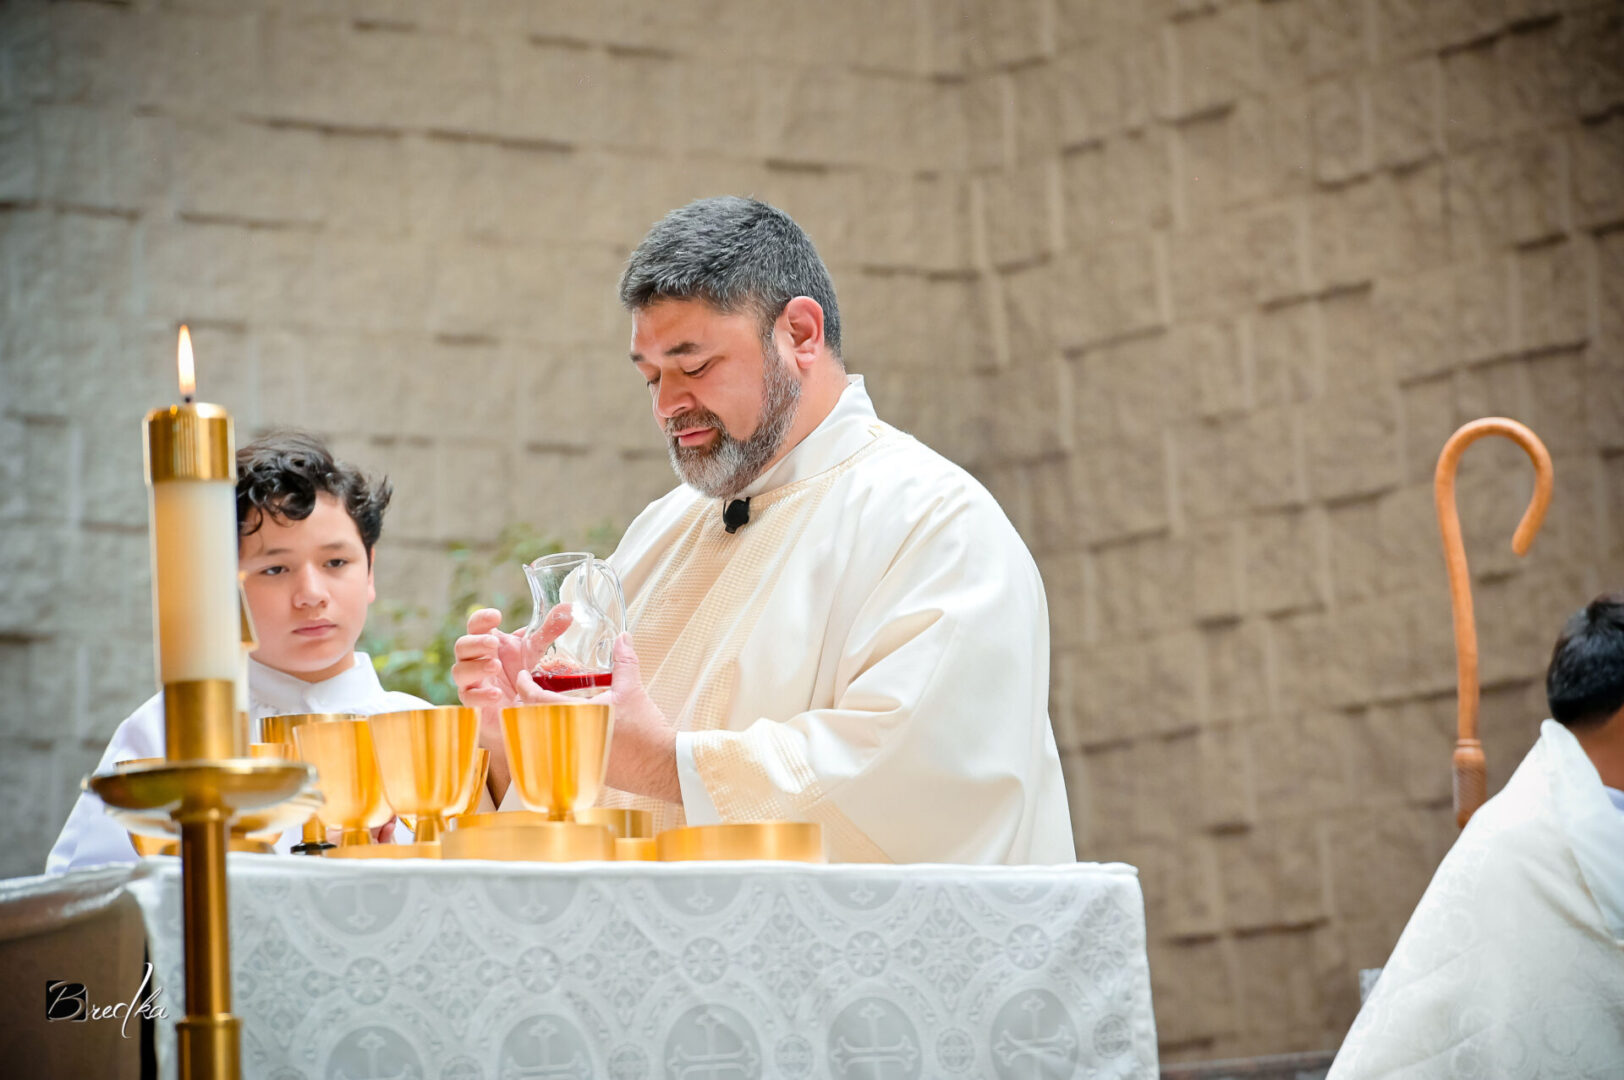 Priest pouring wine during a church service.